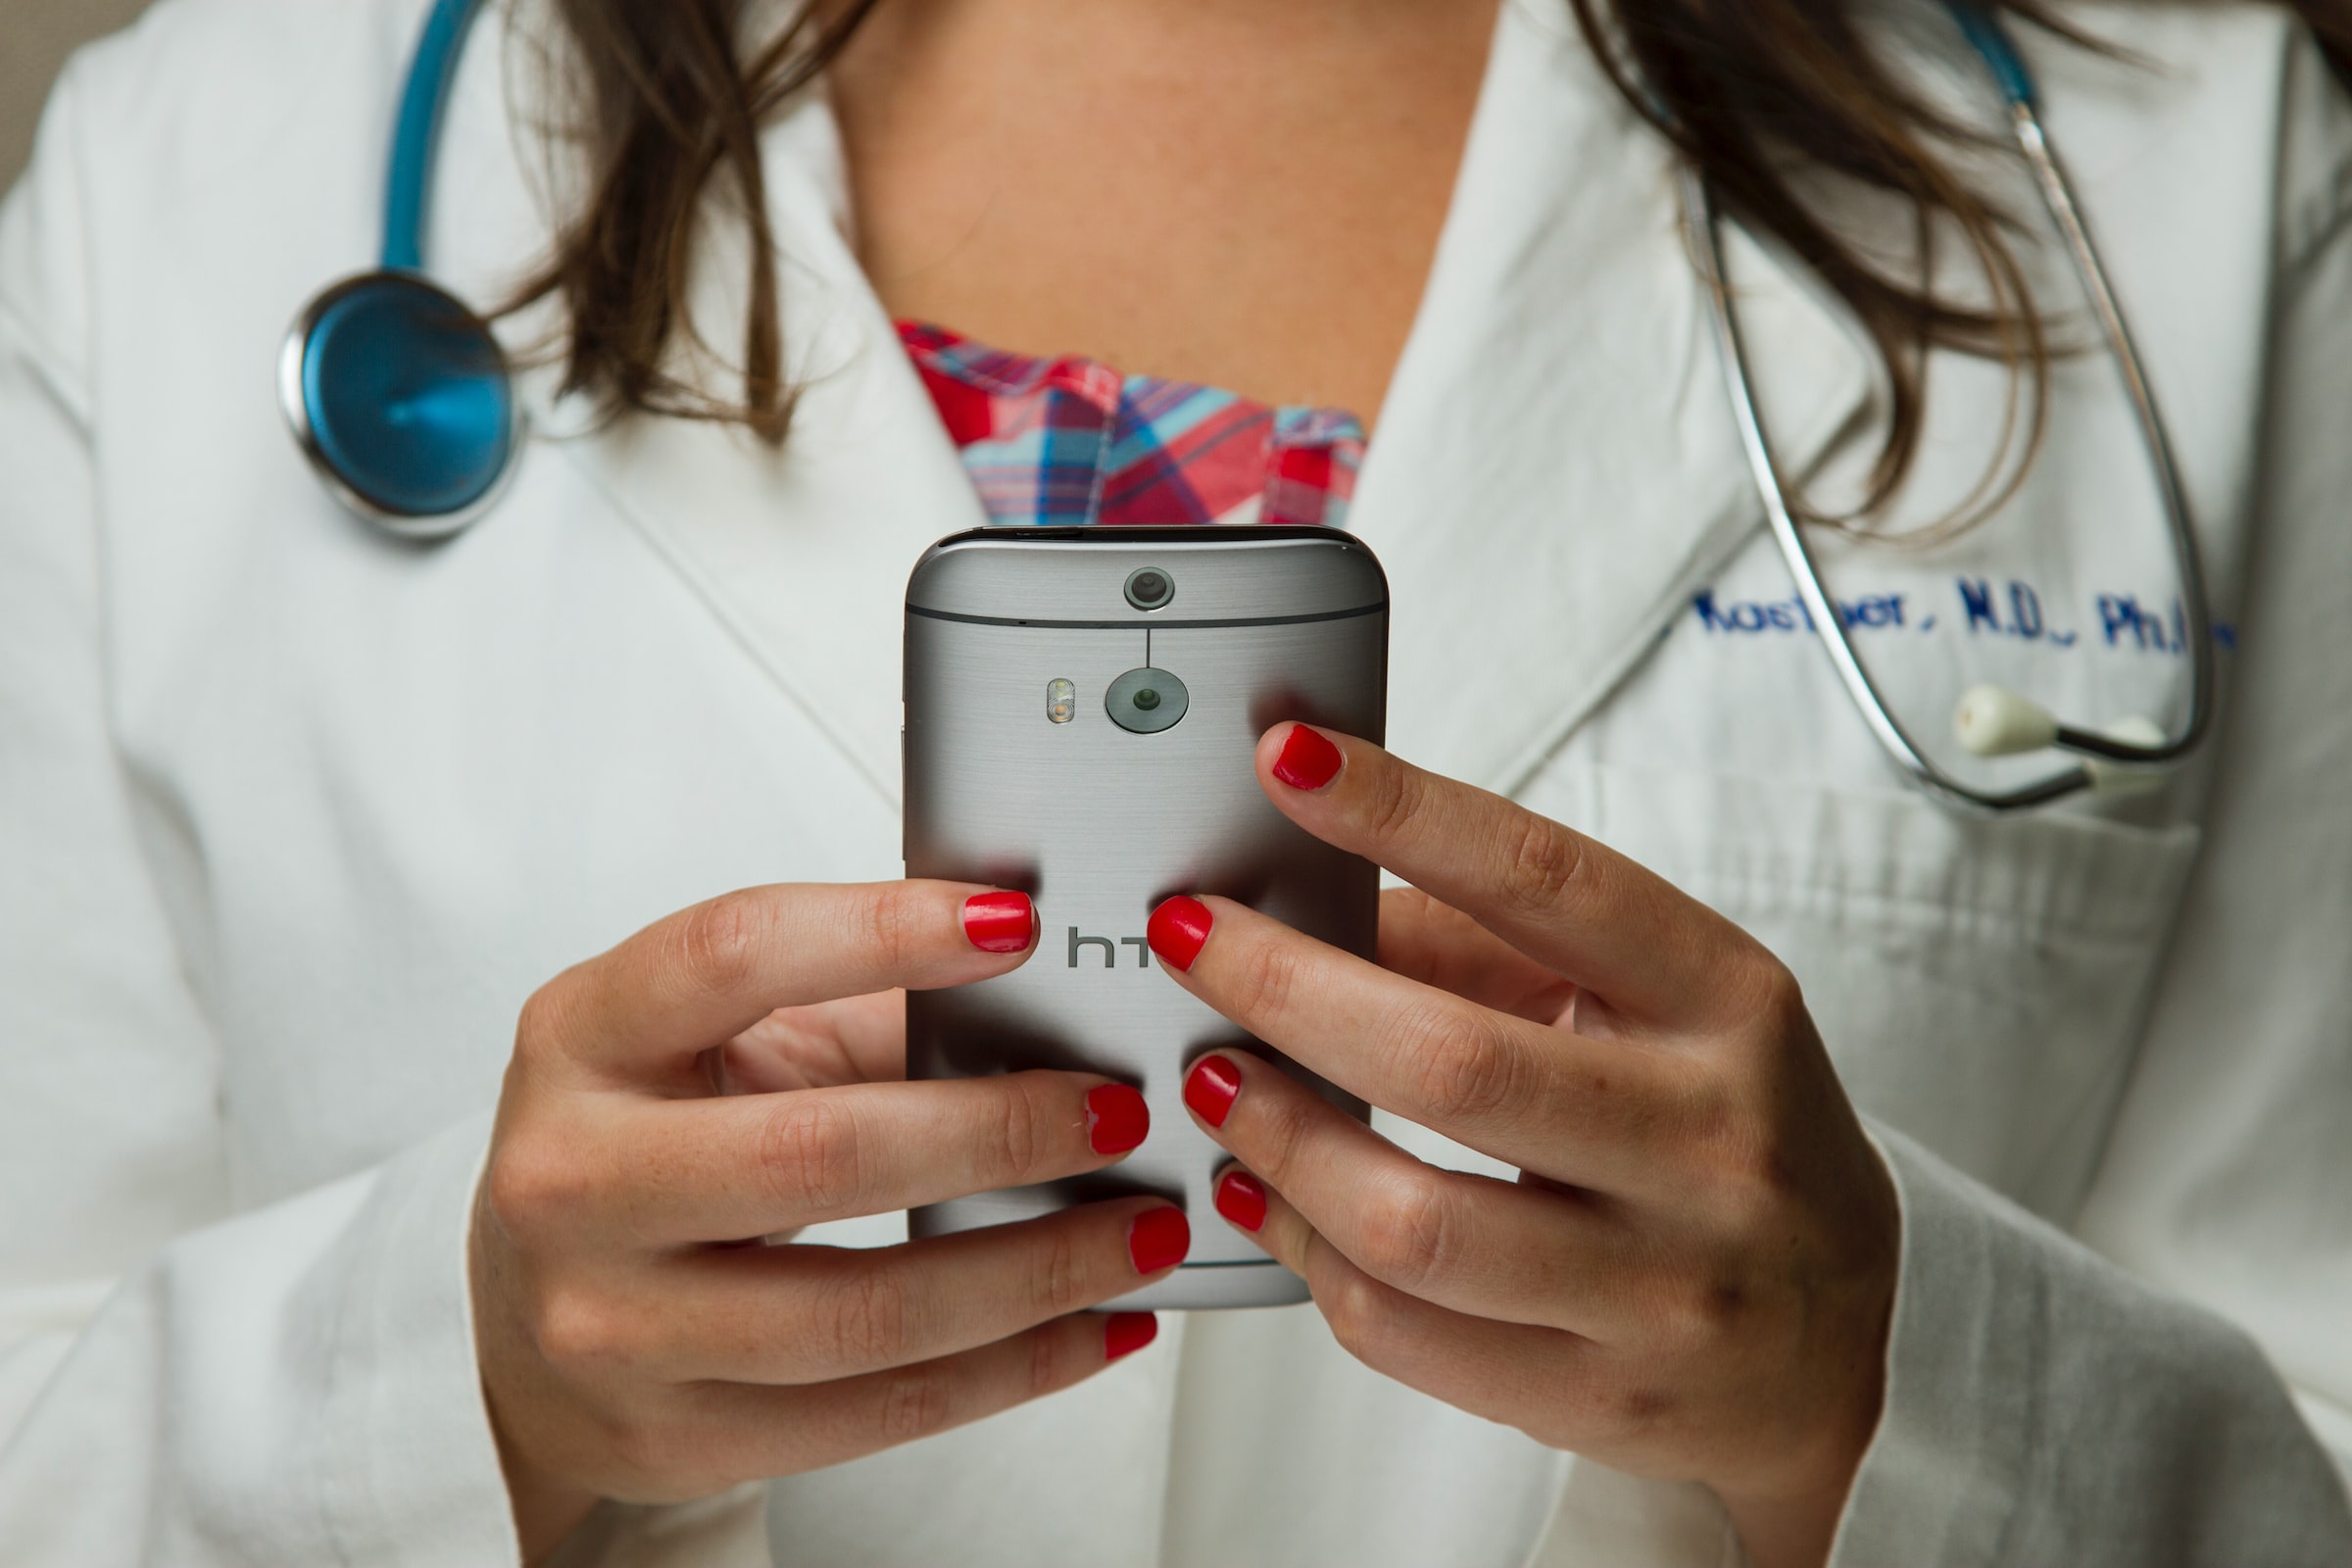 Female doctor using an htc phone